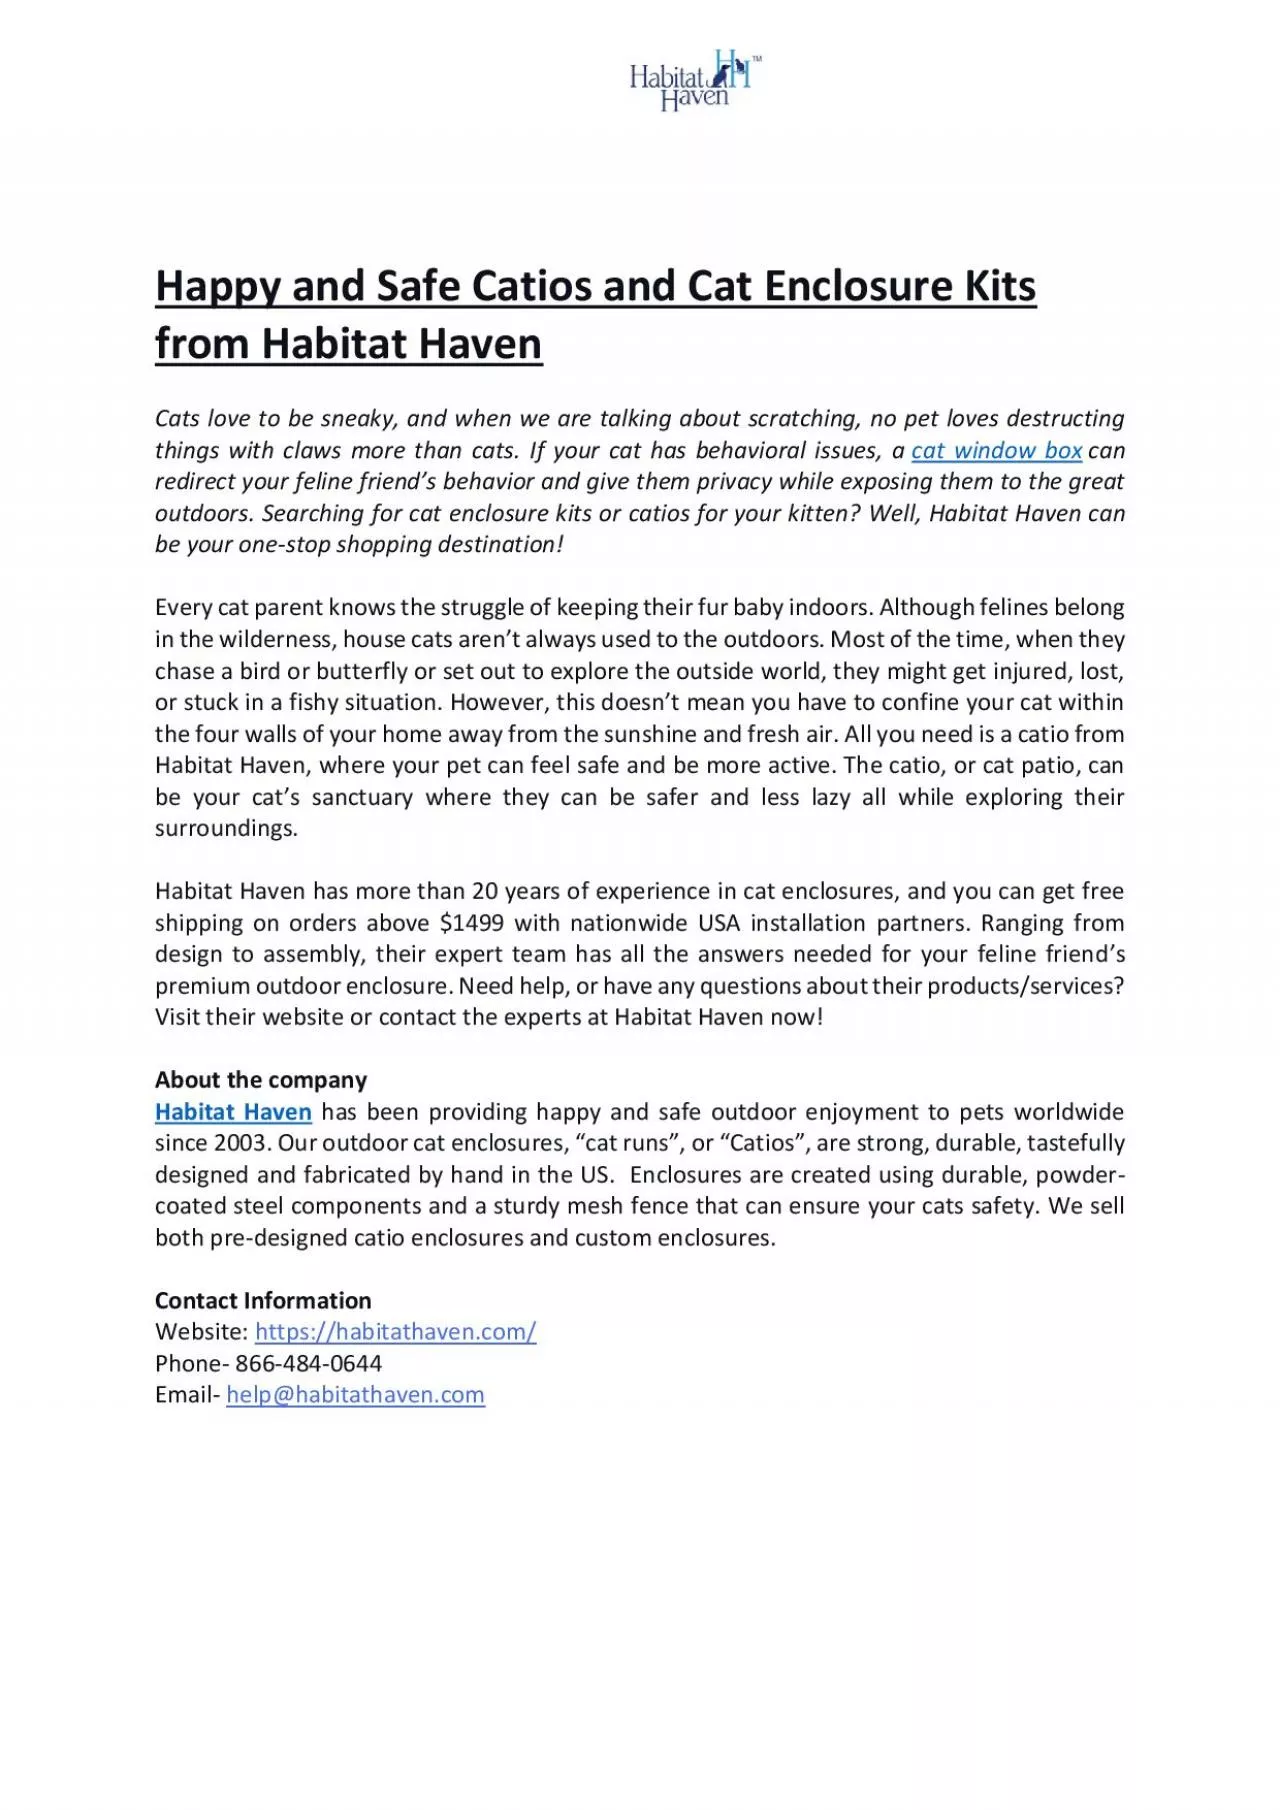 Happy and Safe Catios and Cat Enclosure Kits from Habitat Haven